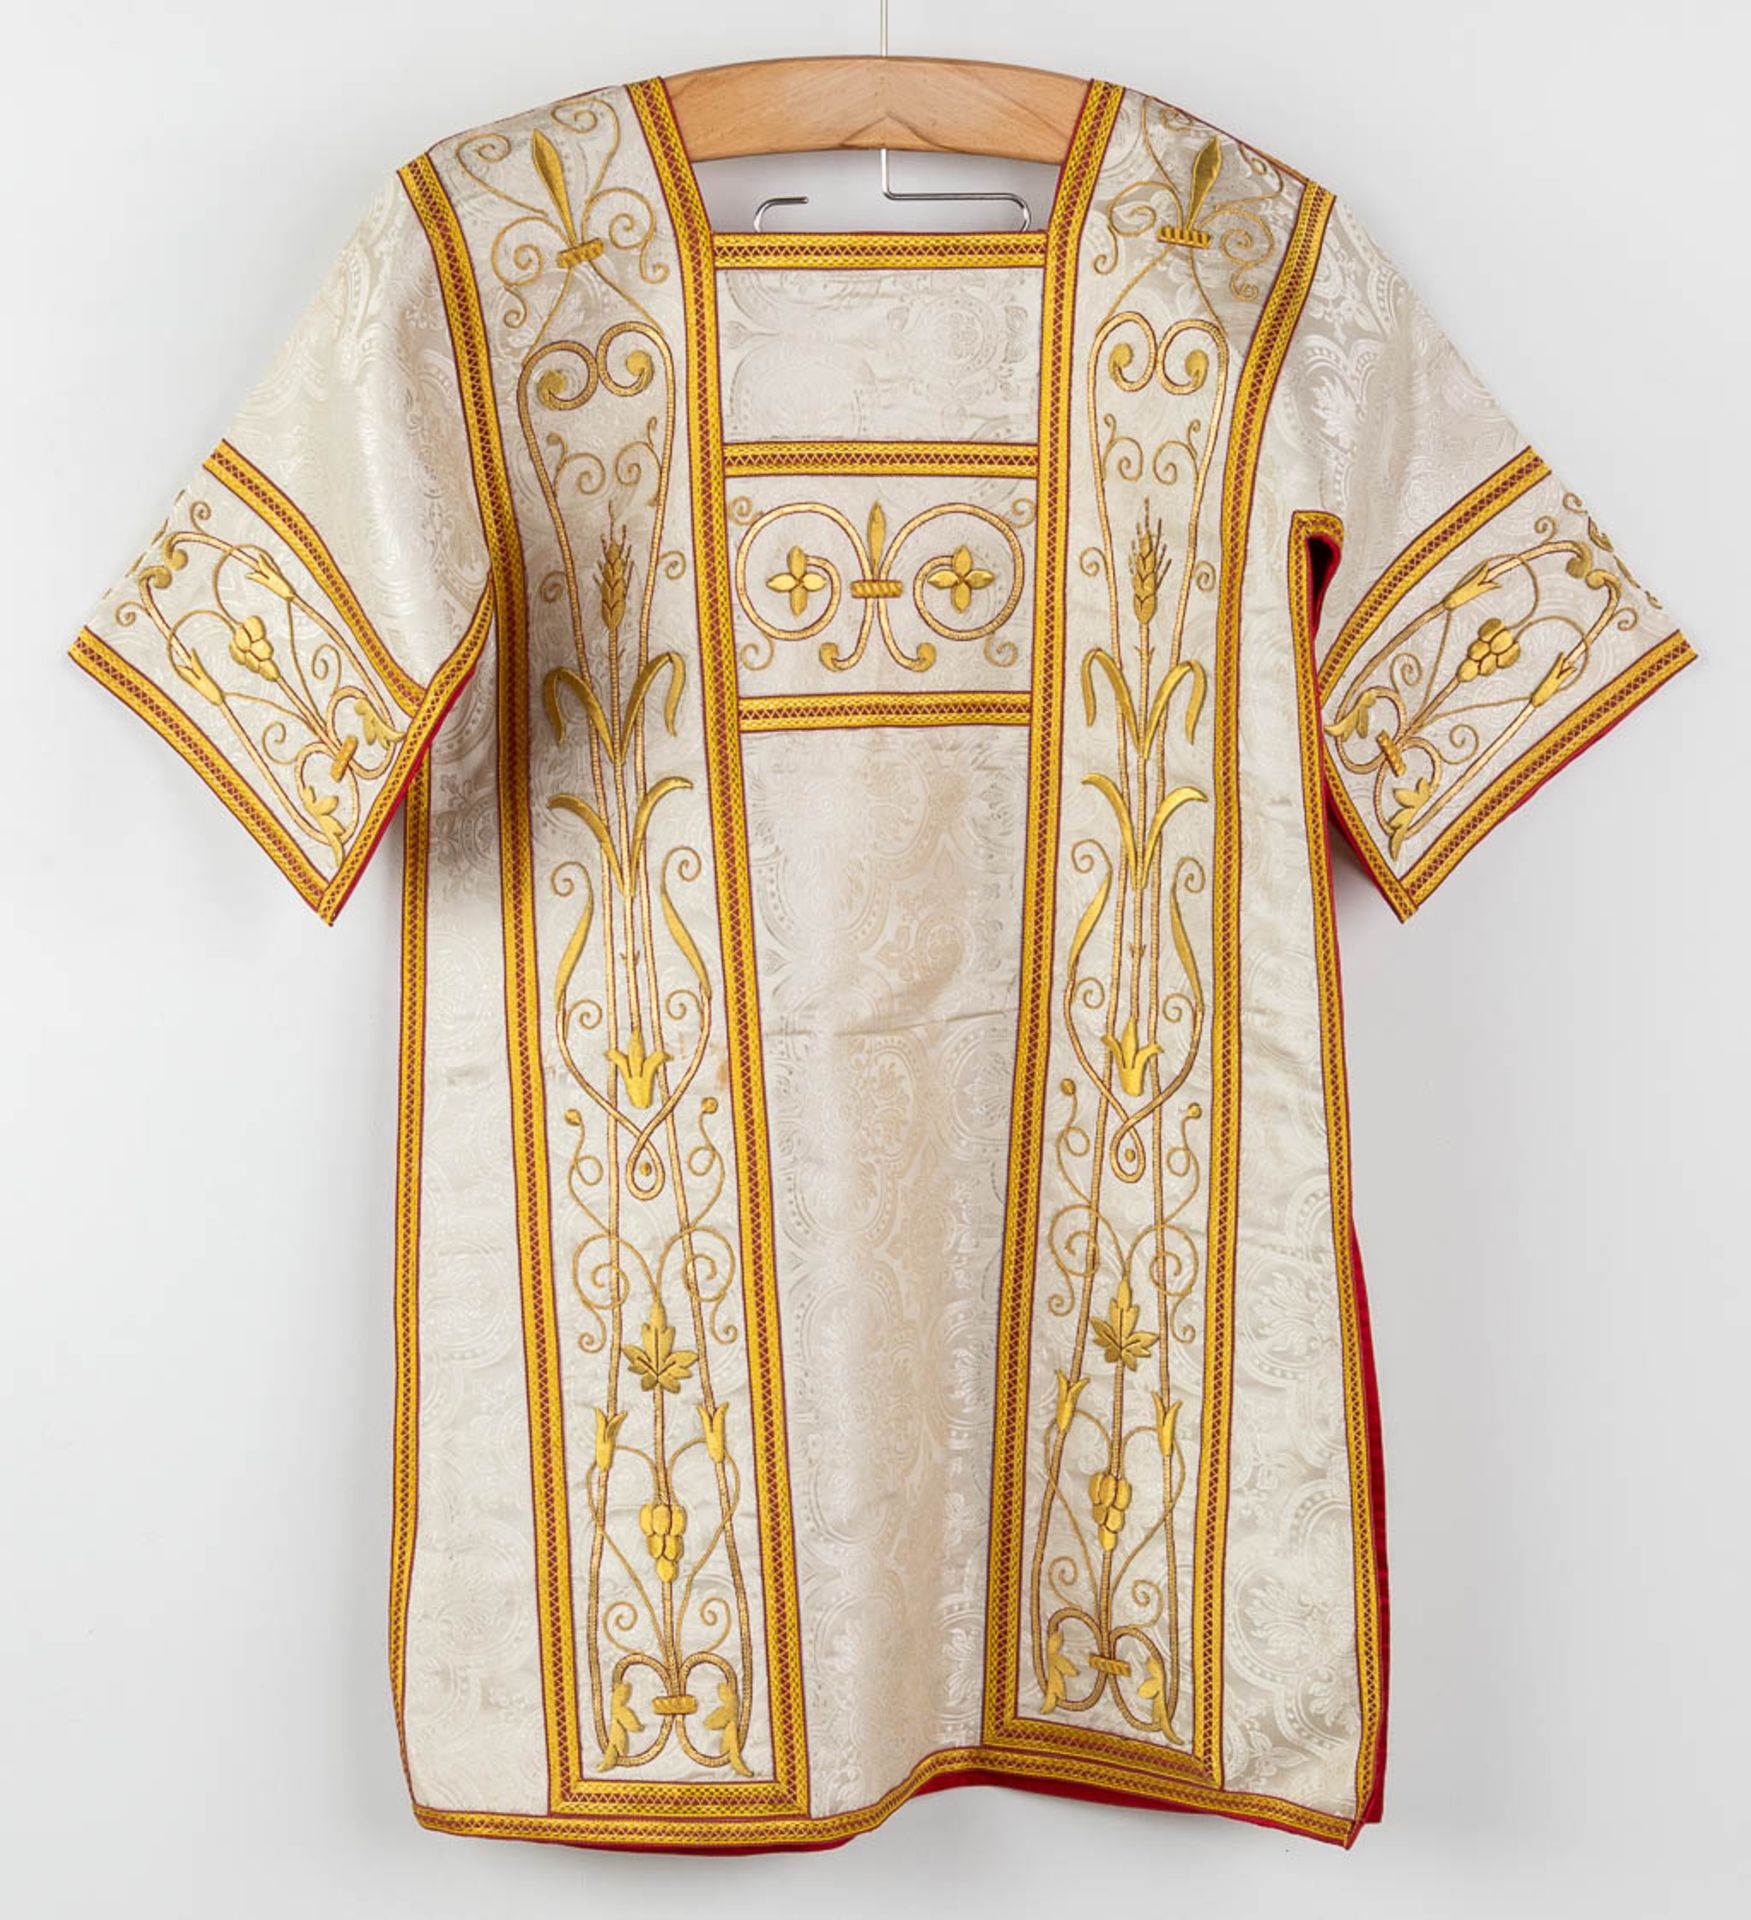 A matching set of Liturgical robes, 4 dalmatics, maniples and stola. - Image 2 of 17